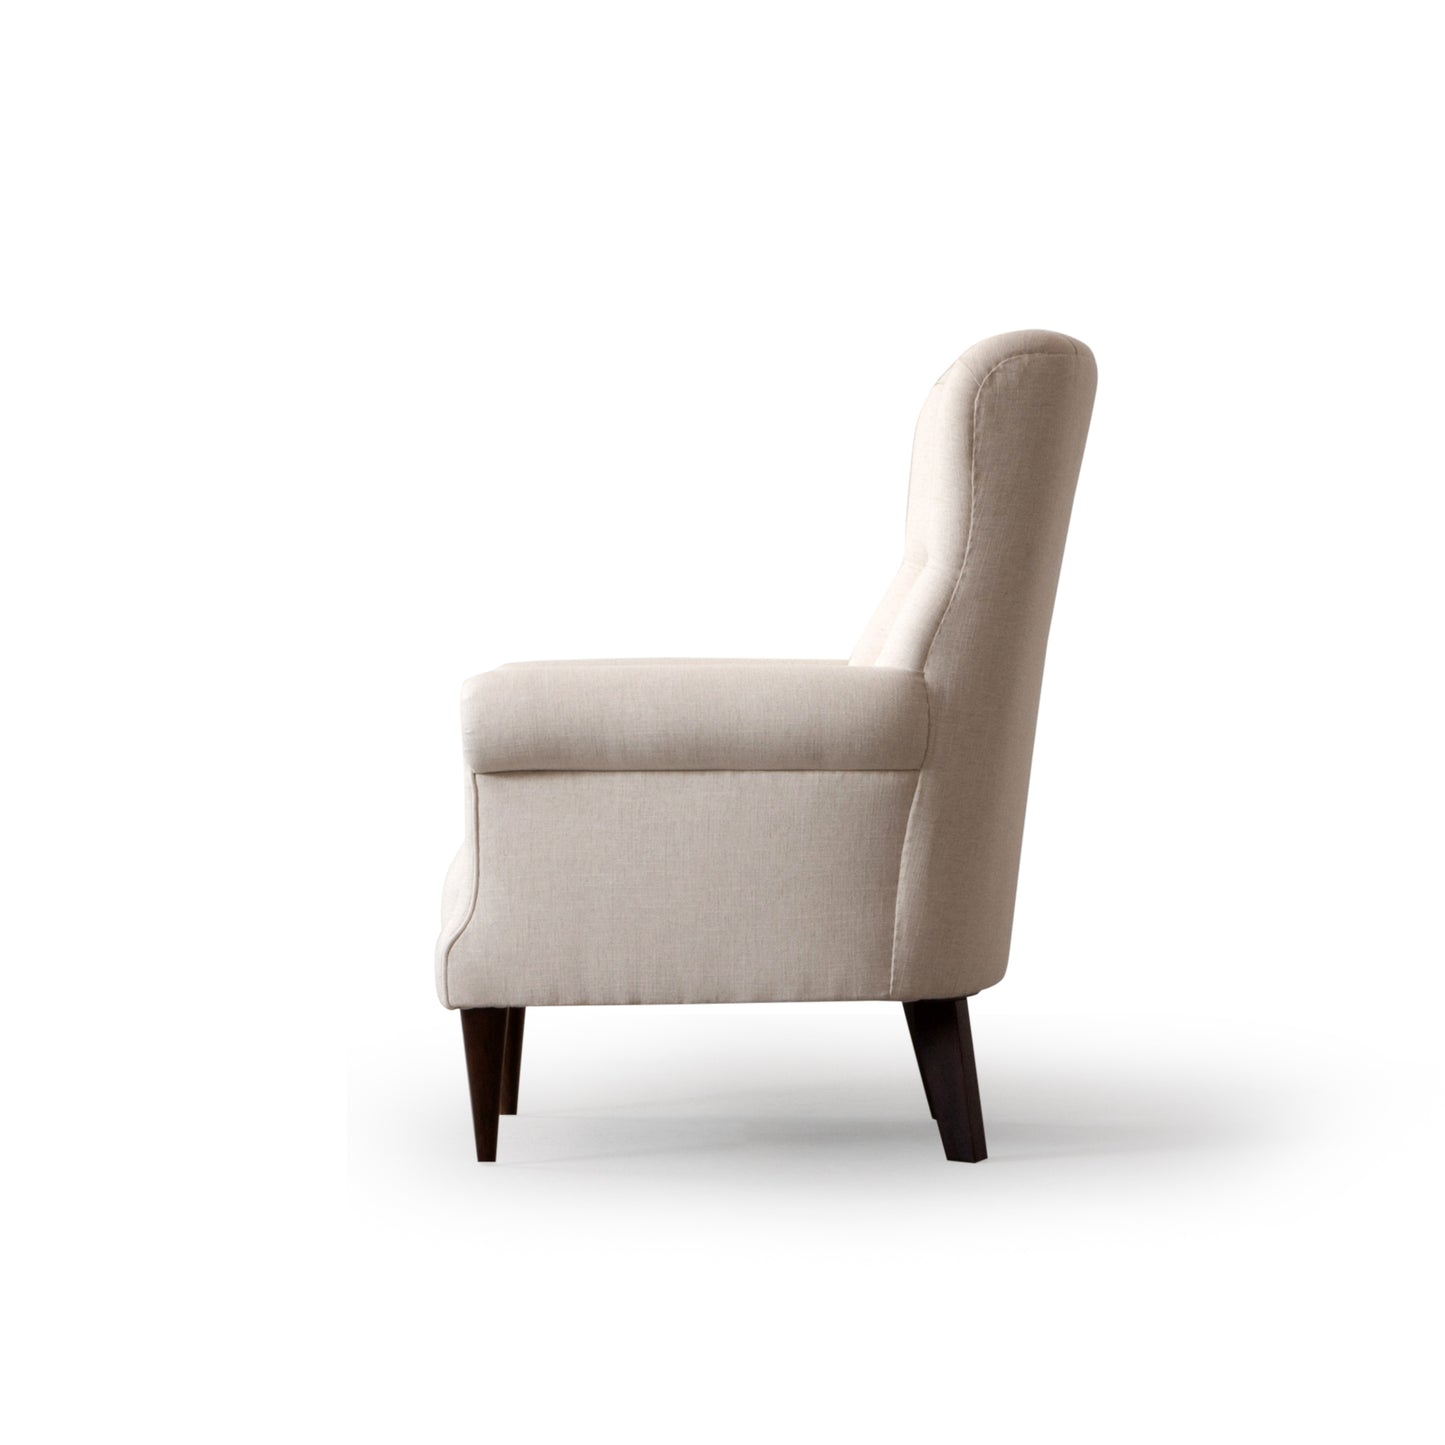 Prima Tufted Accent Chair